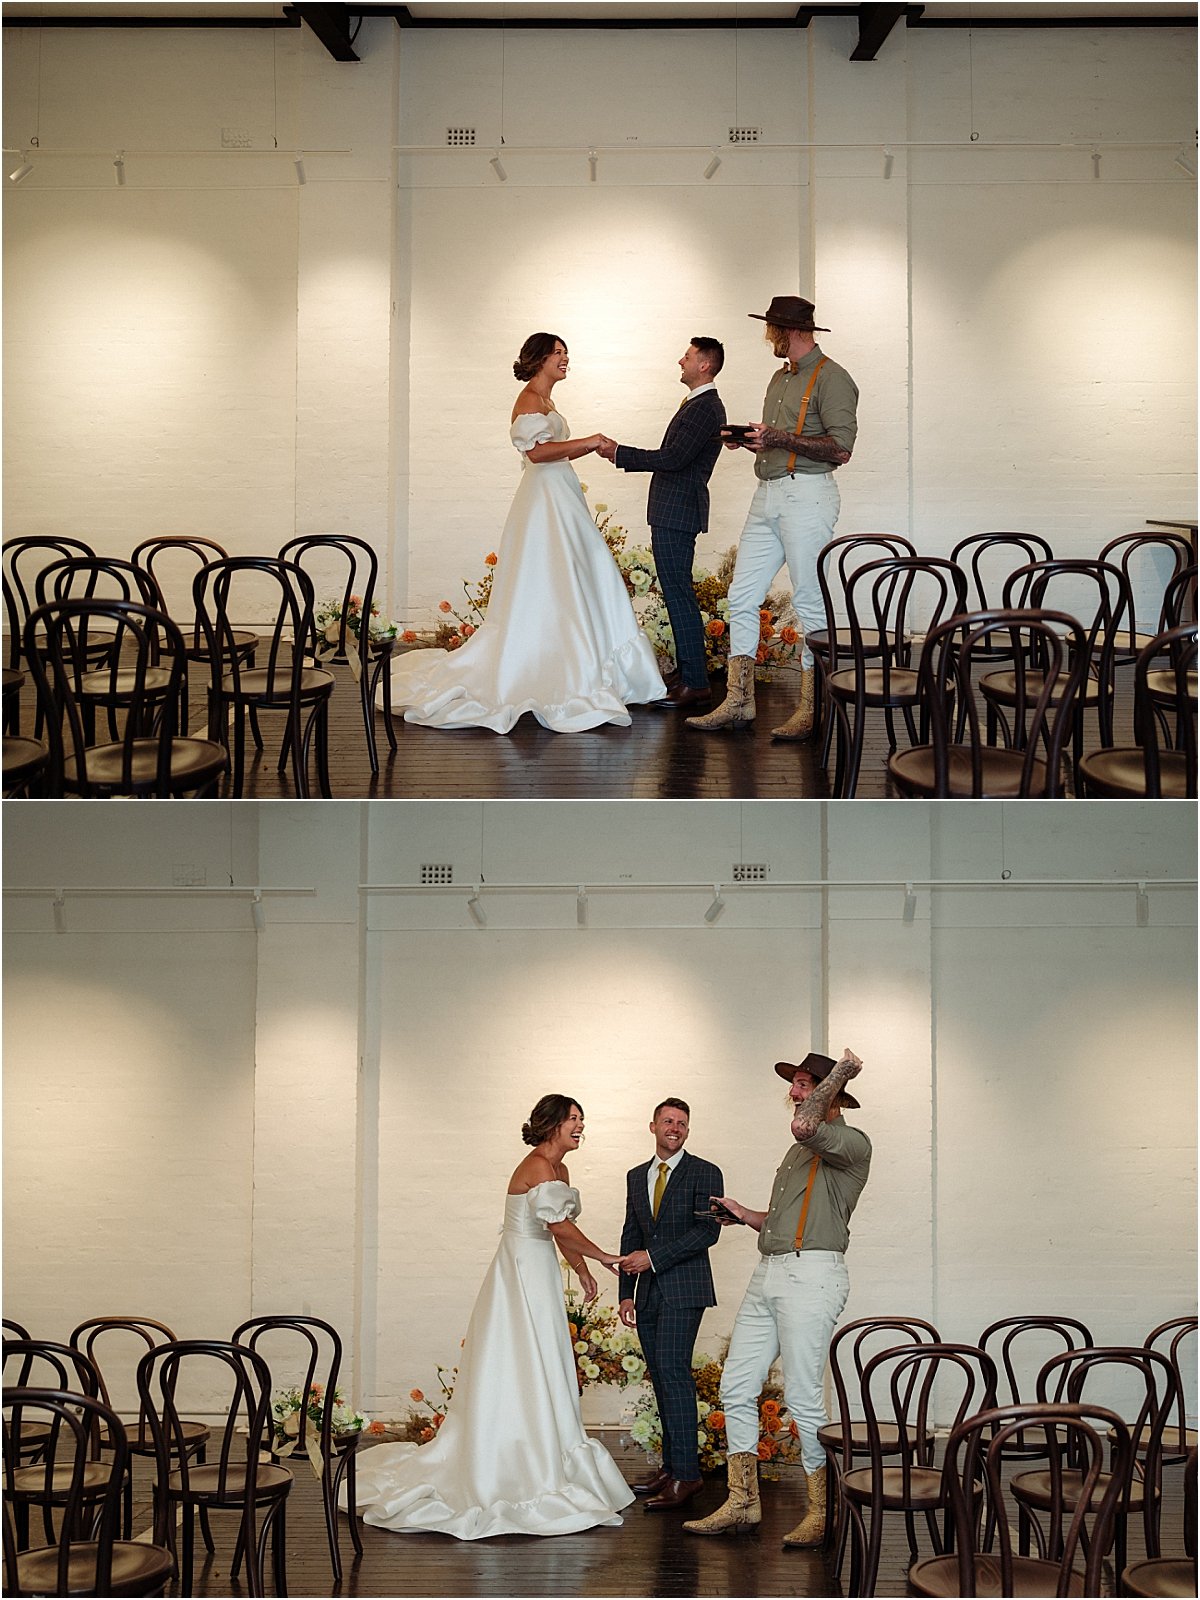 Bride and groom getting married in front of floral nest installation at the Owens Collective in Islington NSW